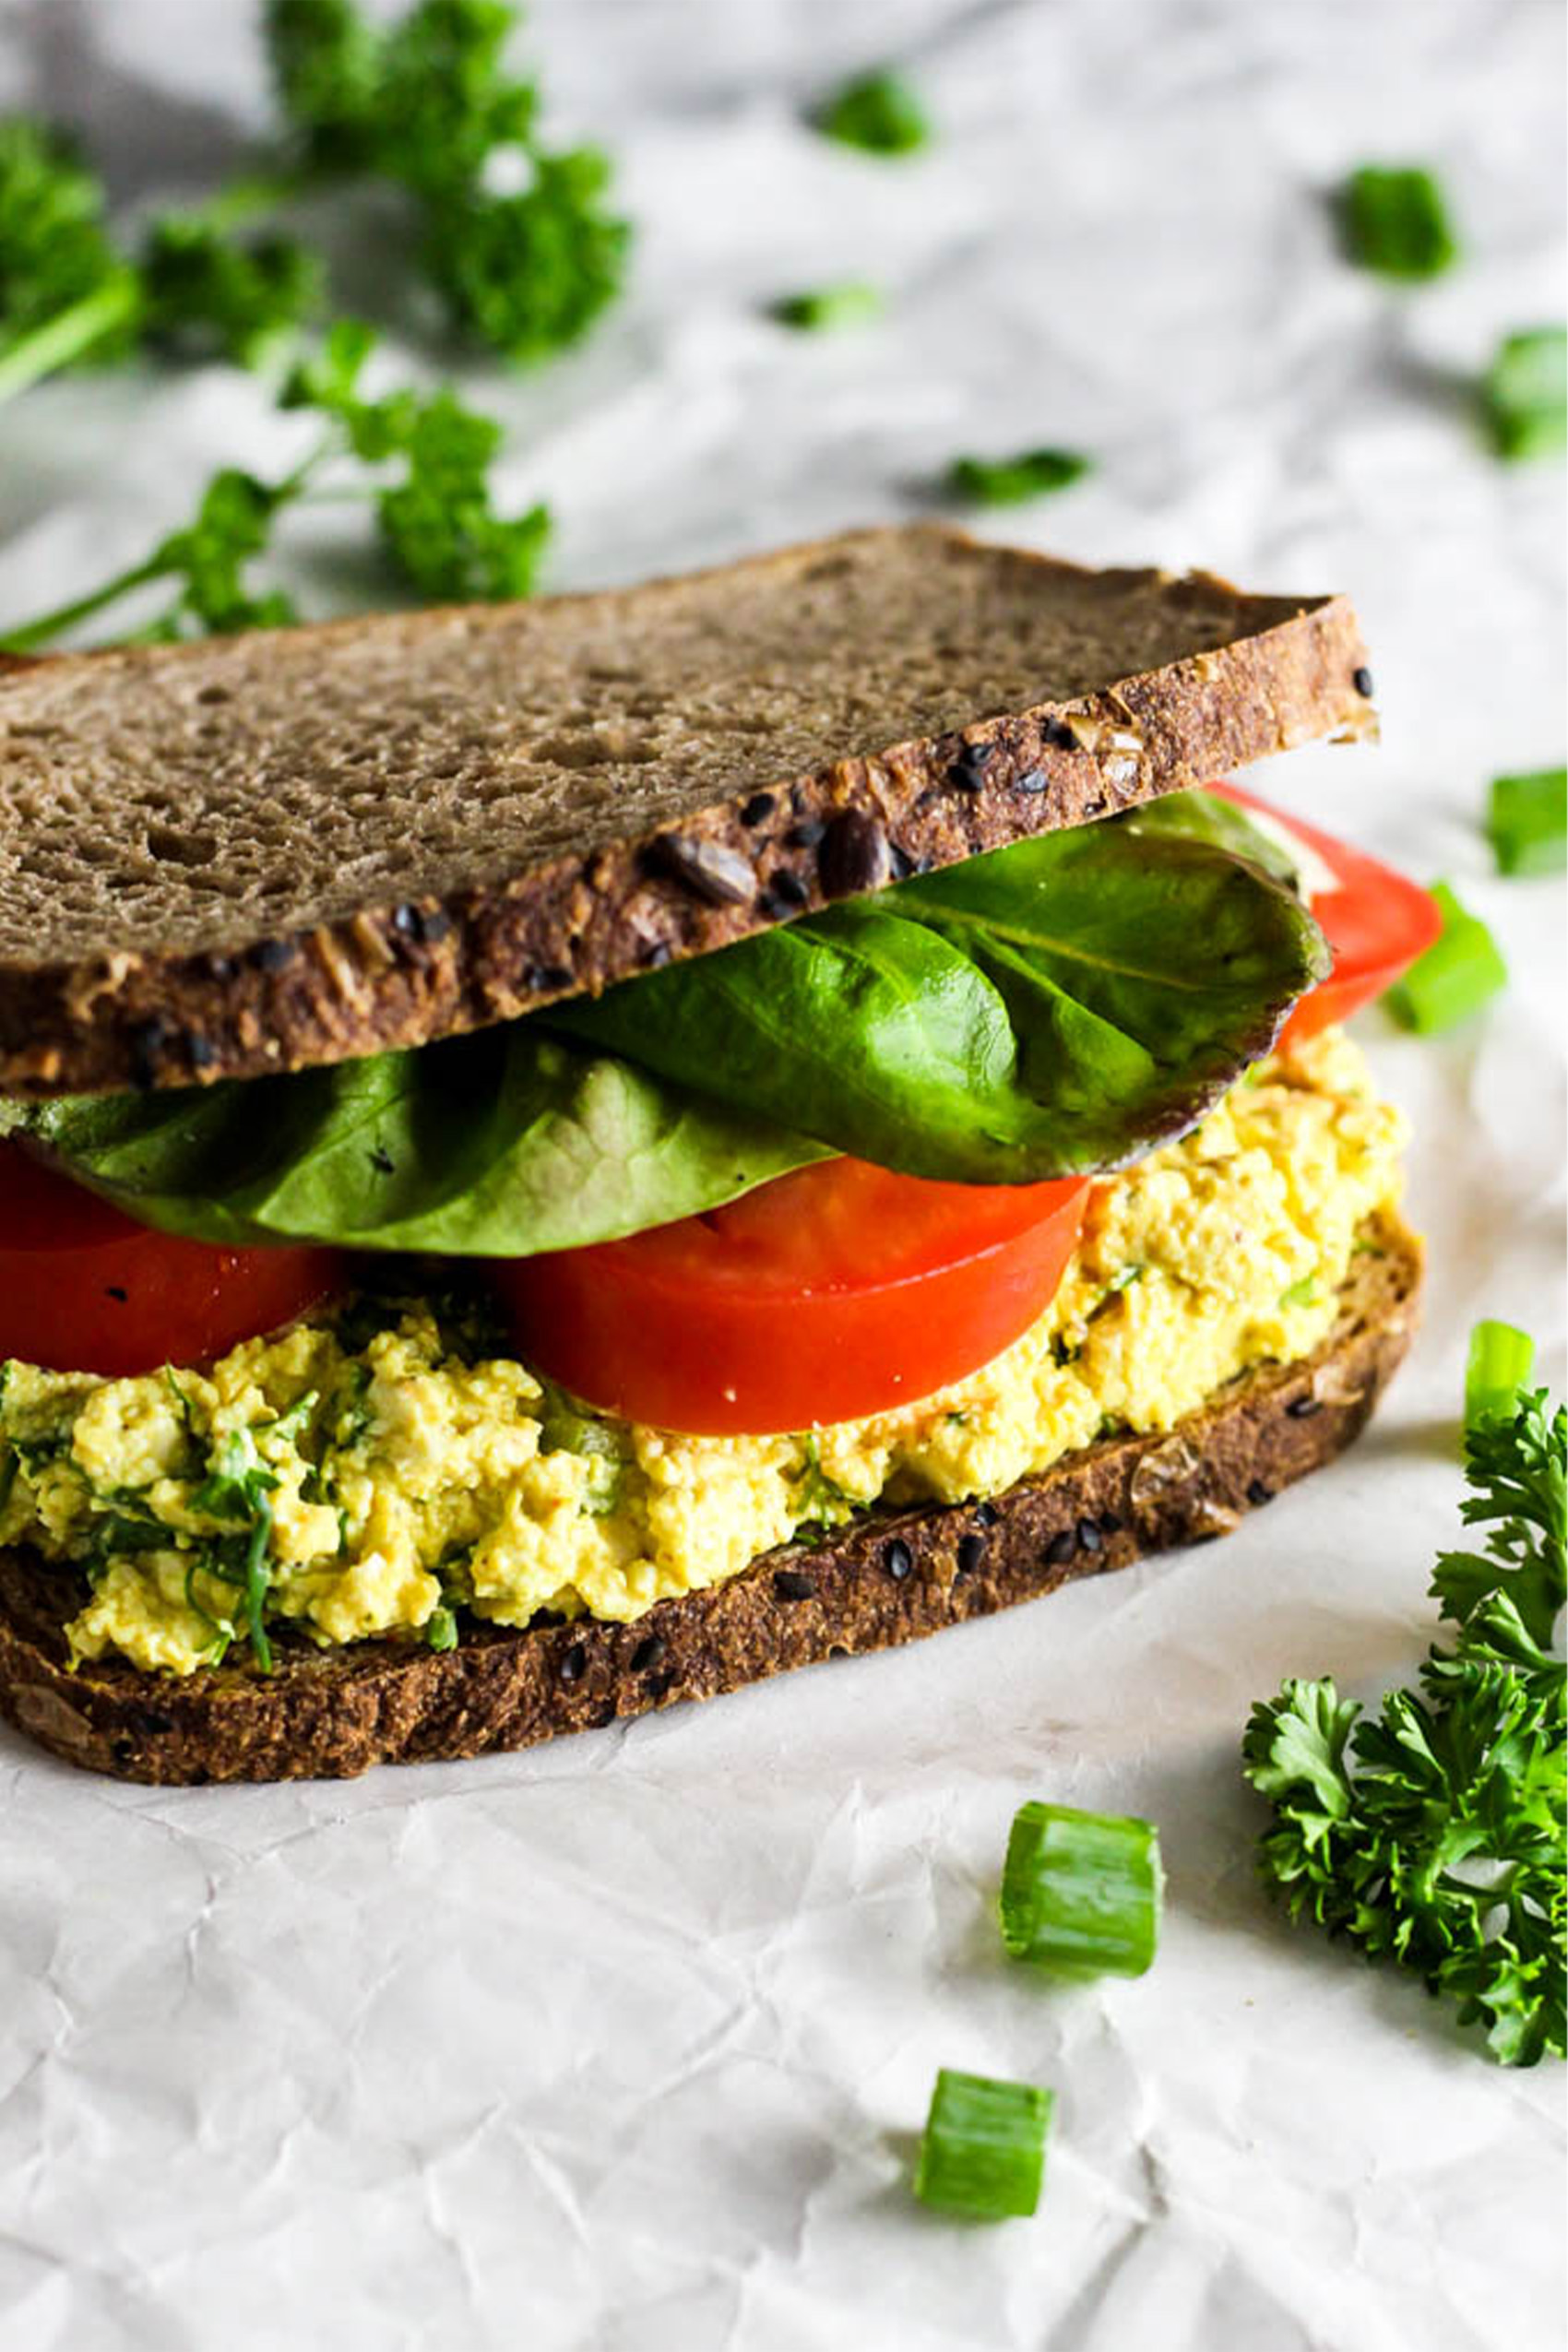 a vegan egg salad sandwich served on wheat bread with spinach and sliced tomatoes